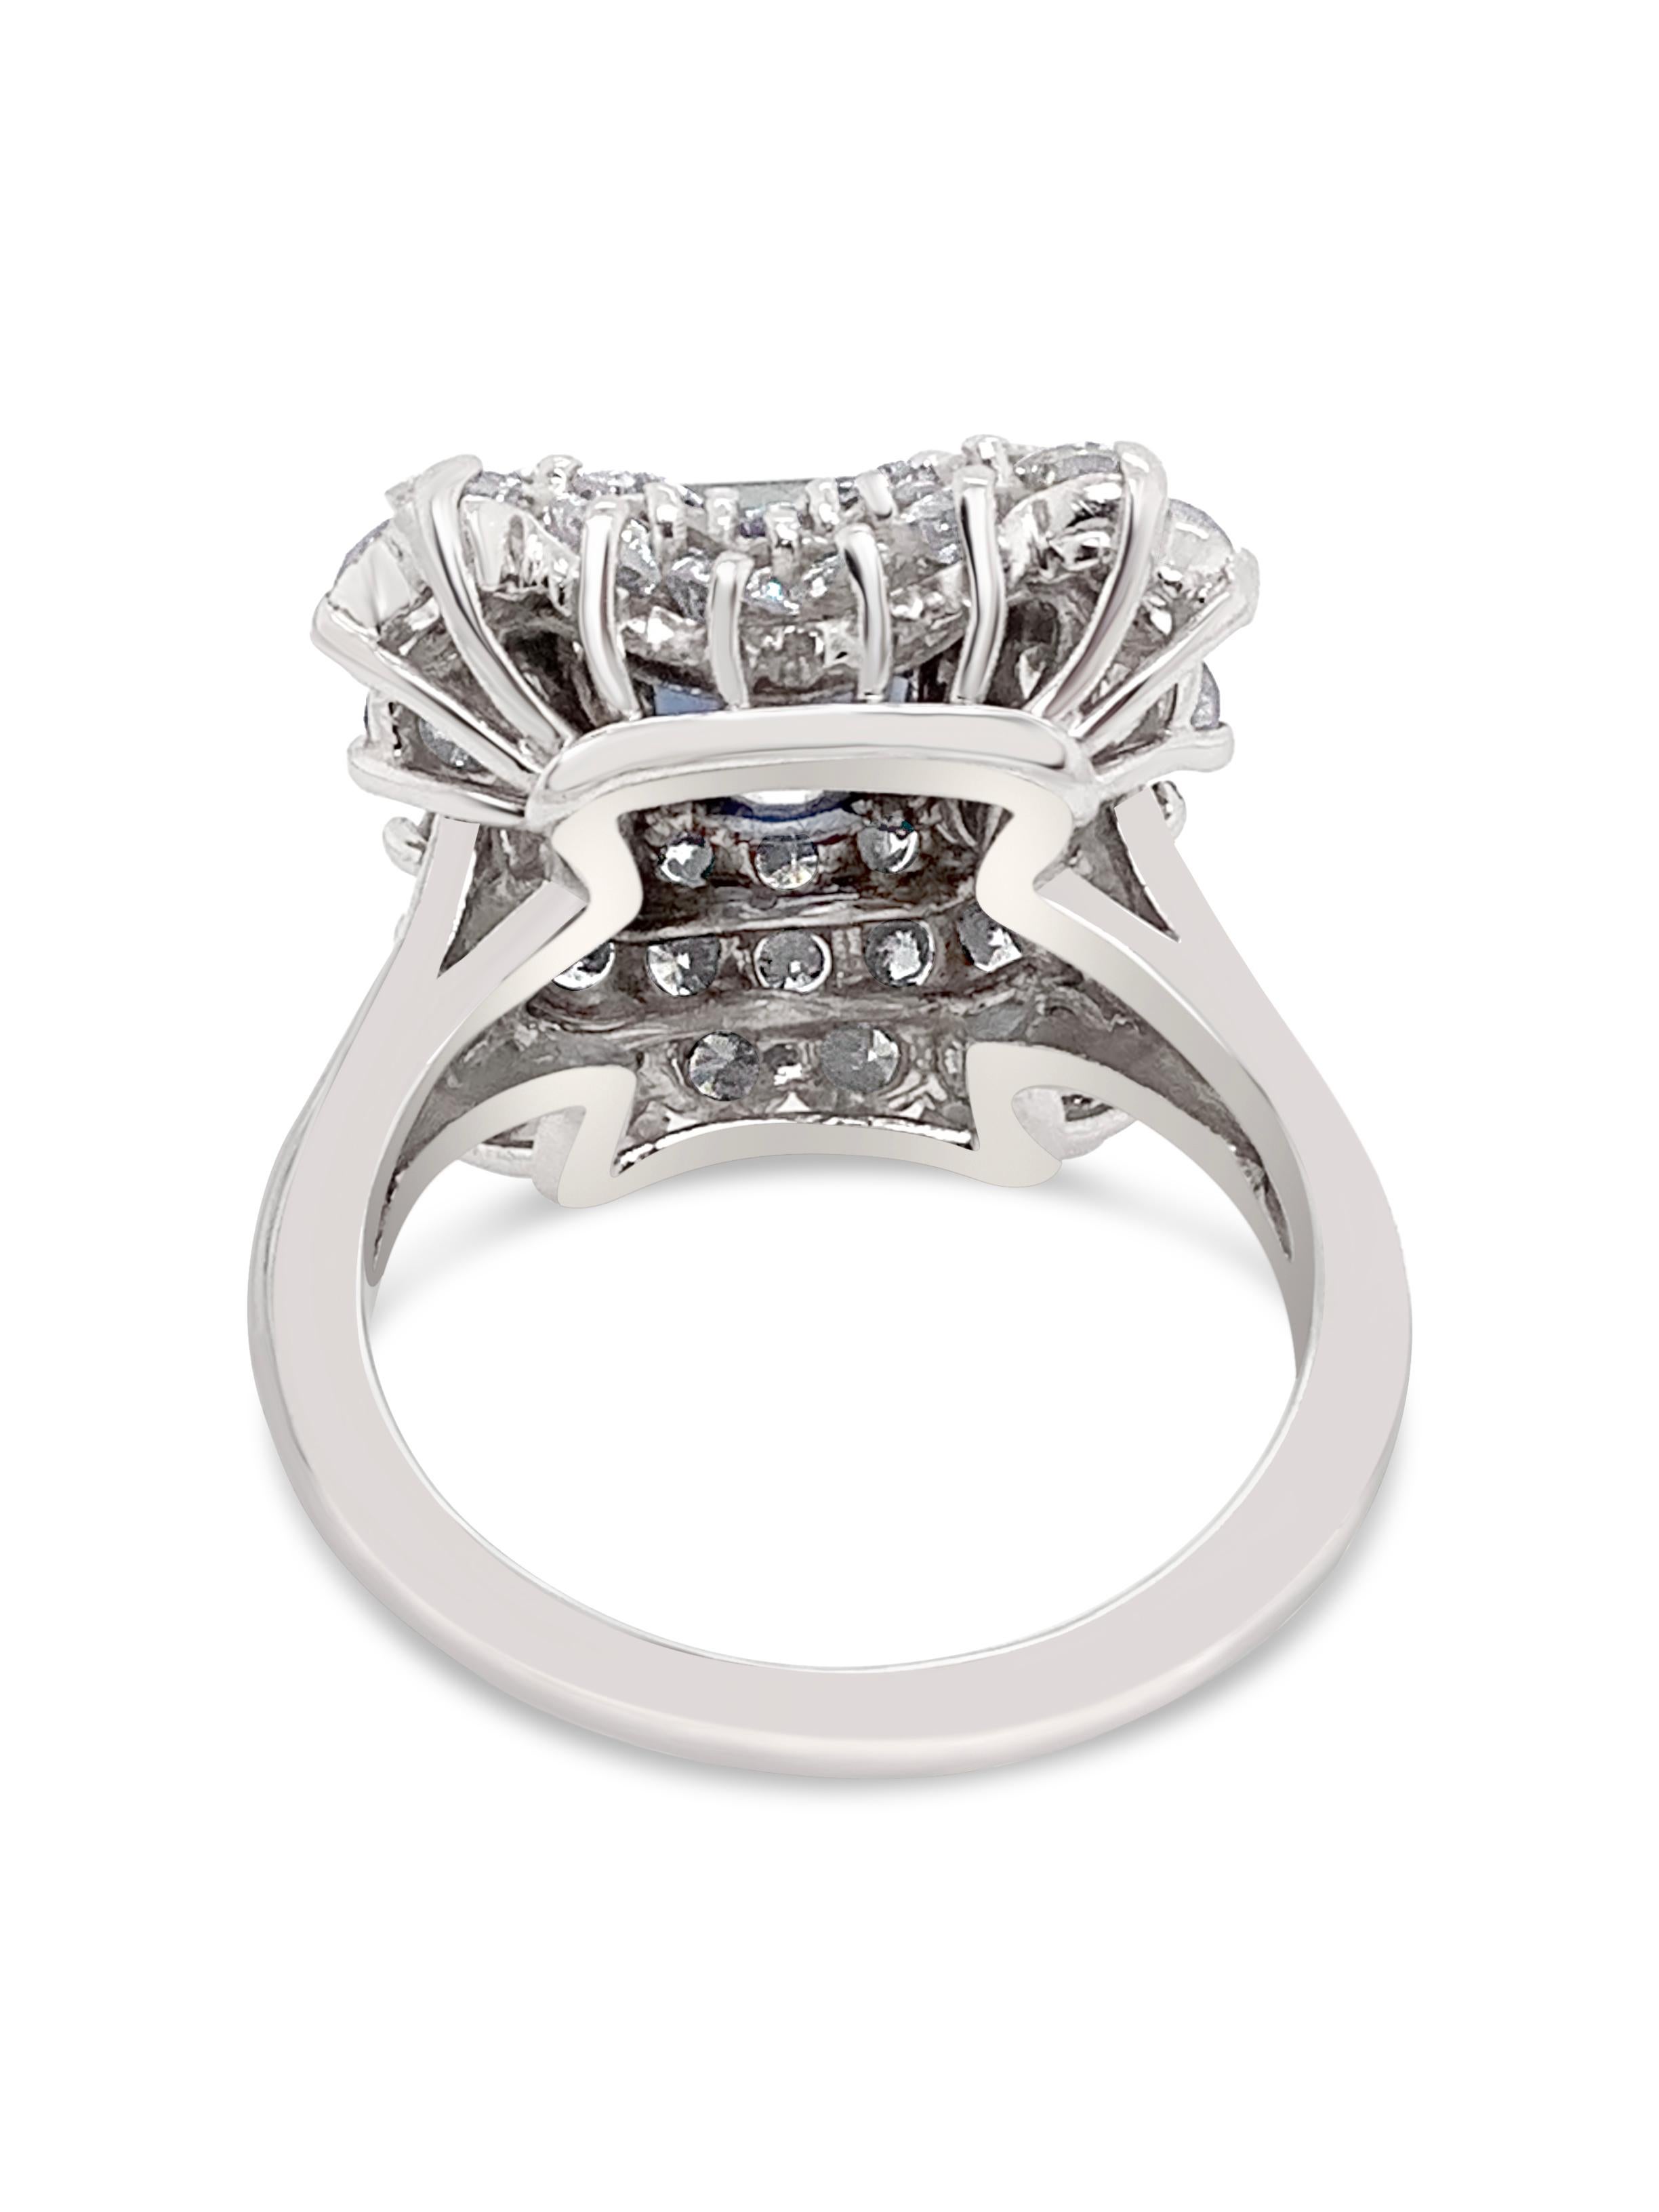 Contemporary 1960s 1.82 Carat Sapphire and 3 Carat Total Weight Diamond Ring in Platinum For Sale